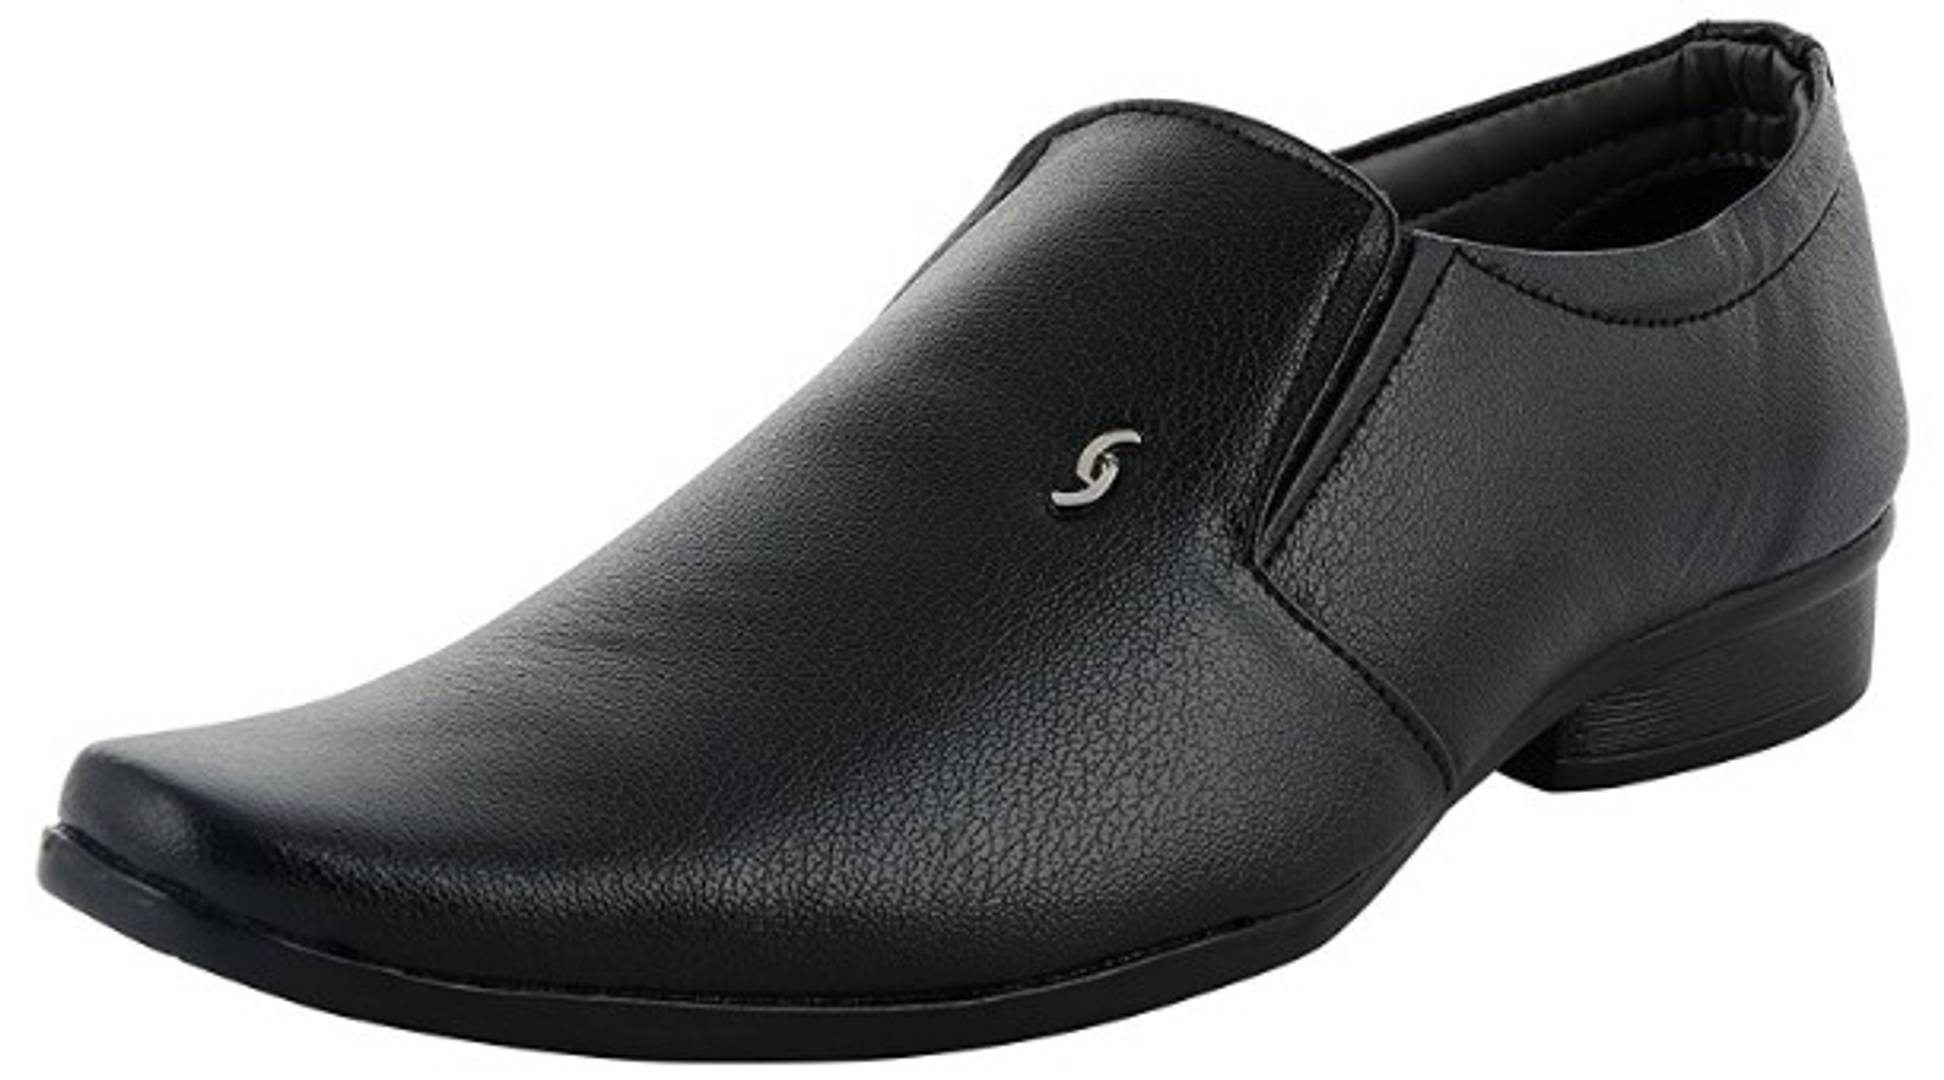 Mens Modern Black Solid Synthetic Leather Slip On Formal Shoes